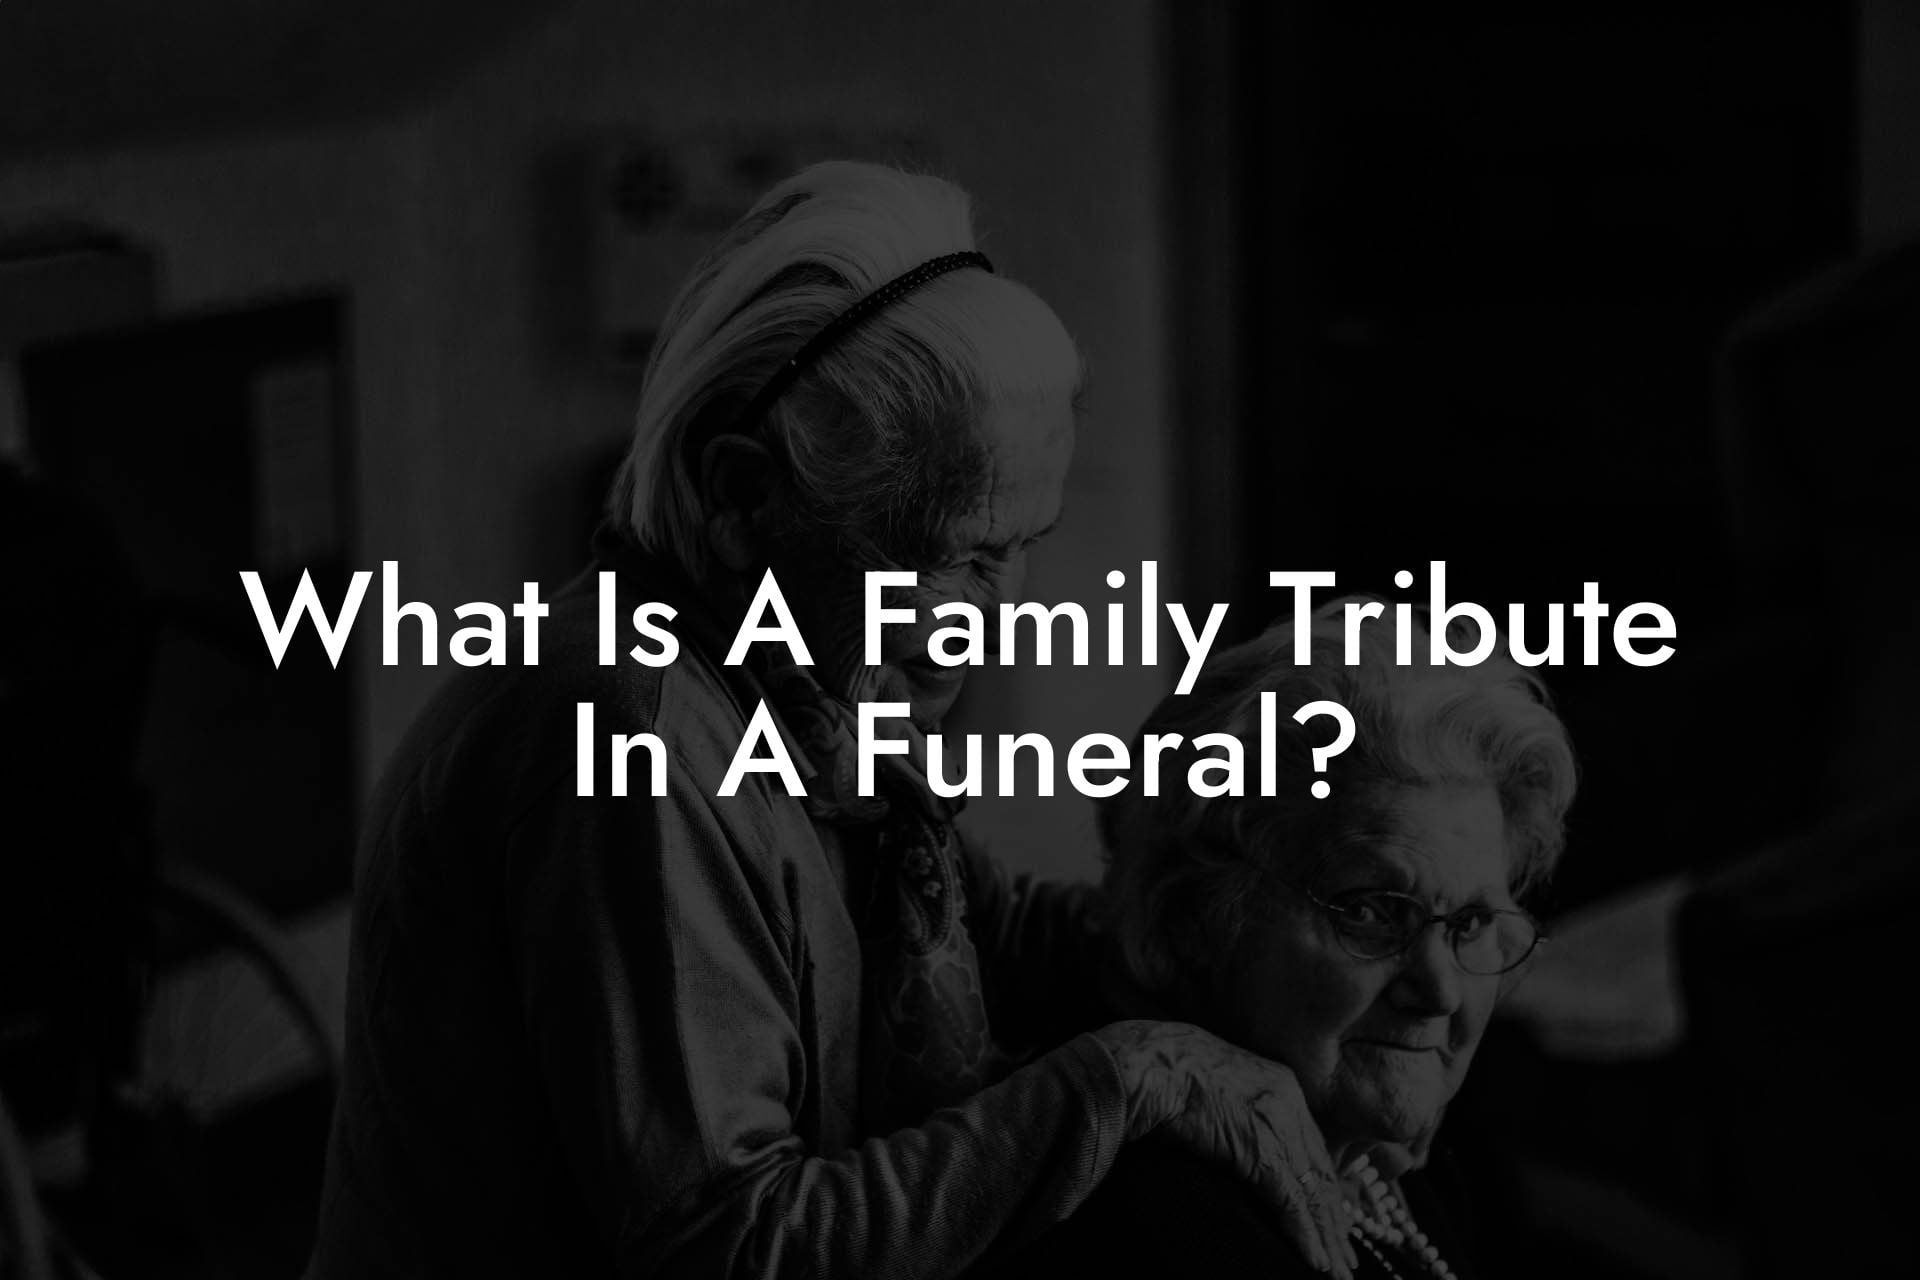 What Is A Family Tribute In A Funeral?